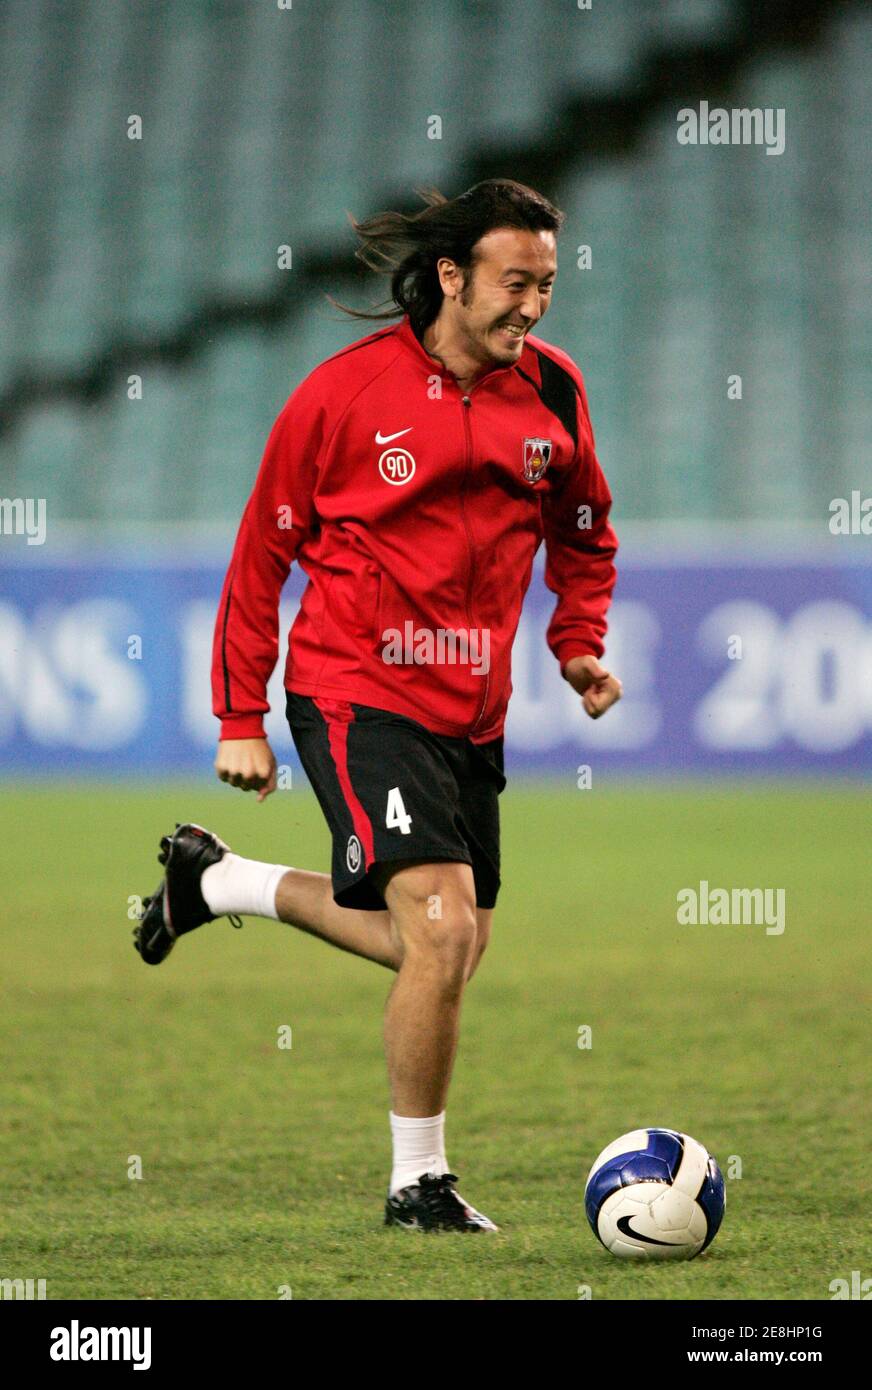 Tulio of the Urawa Red Diamonds from Japan warms up before training at the Sydney Football Stadium March 20, 2007. The Urawa Red Diamonds will play against Sydney FC in the Asian Football Confederation (AFC) Champions League soccer match on March 21. REUTERS/Will Burgess   (AUSTRALIA) Stock Photo